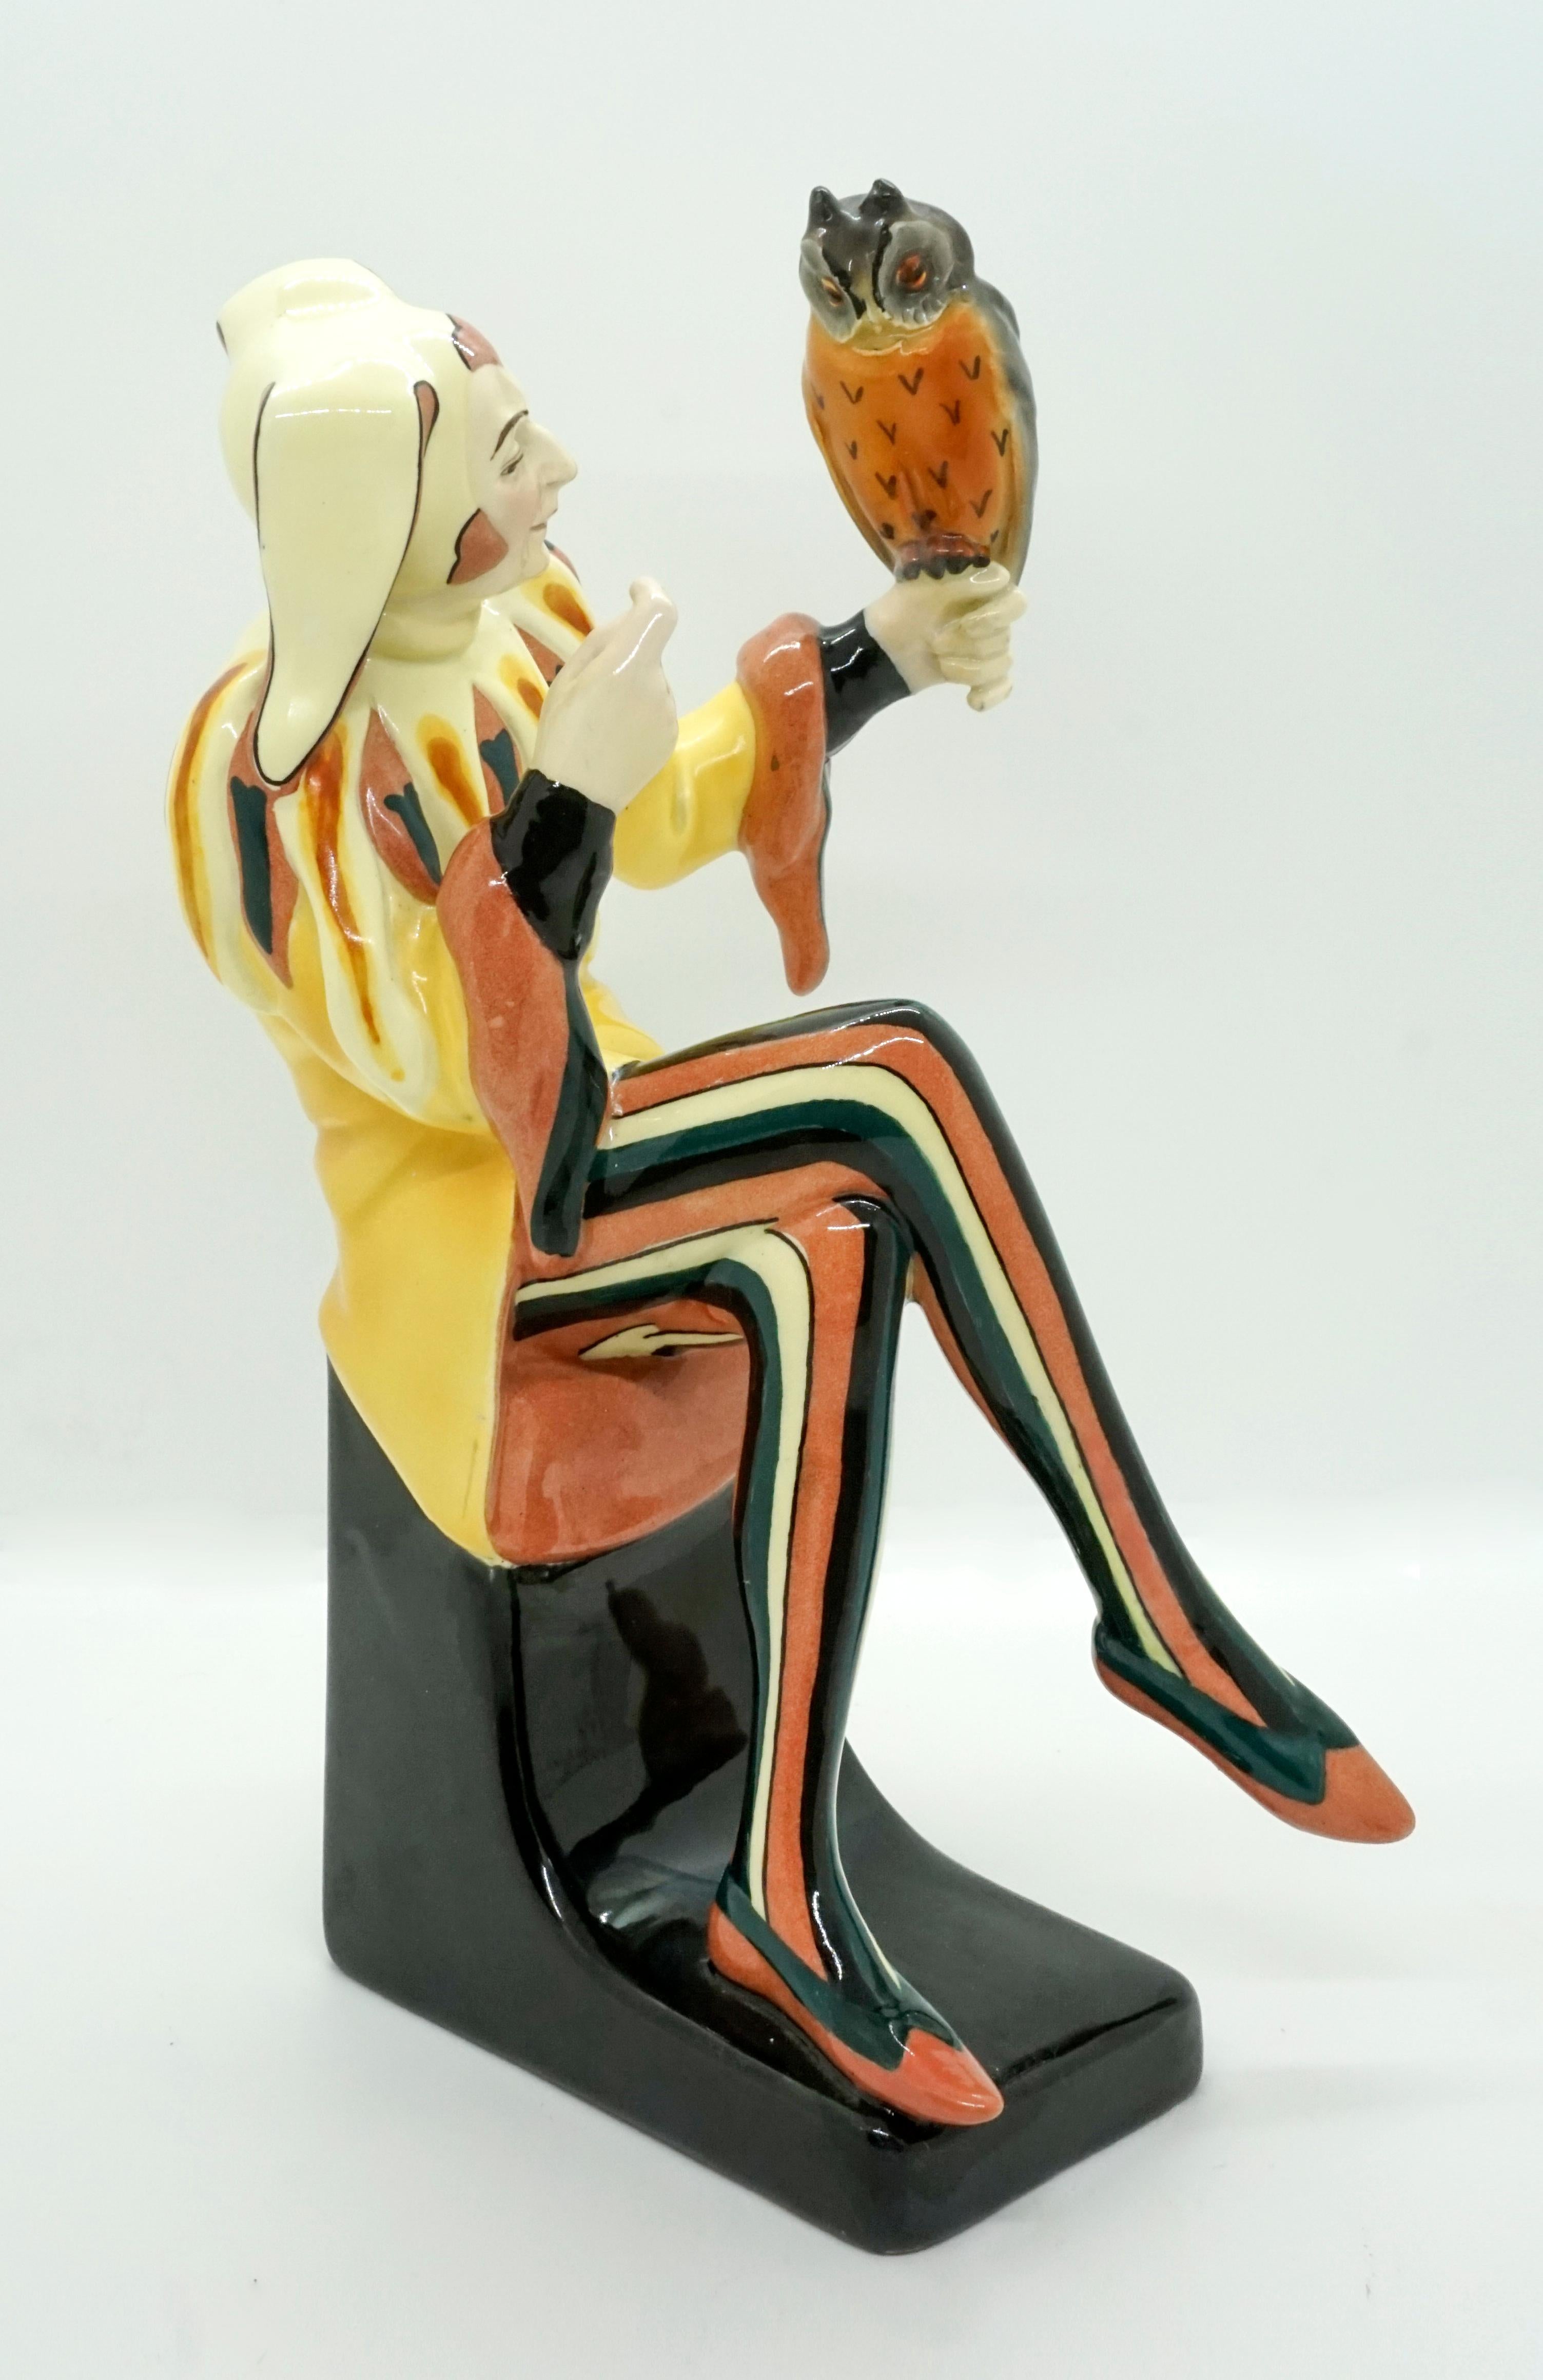 Exceptional Art Deco Goldscheider figurine by Josef Lorenzl.

Designed by Josef Lorenzl (1892-1950), one of the most important designers having been active for Goldscheider manufactory in the period of 1920-1940.
Model 5193 was created